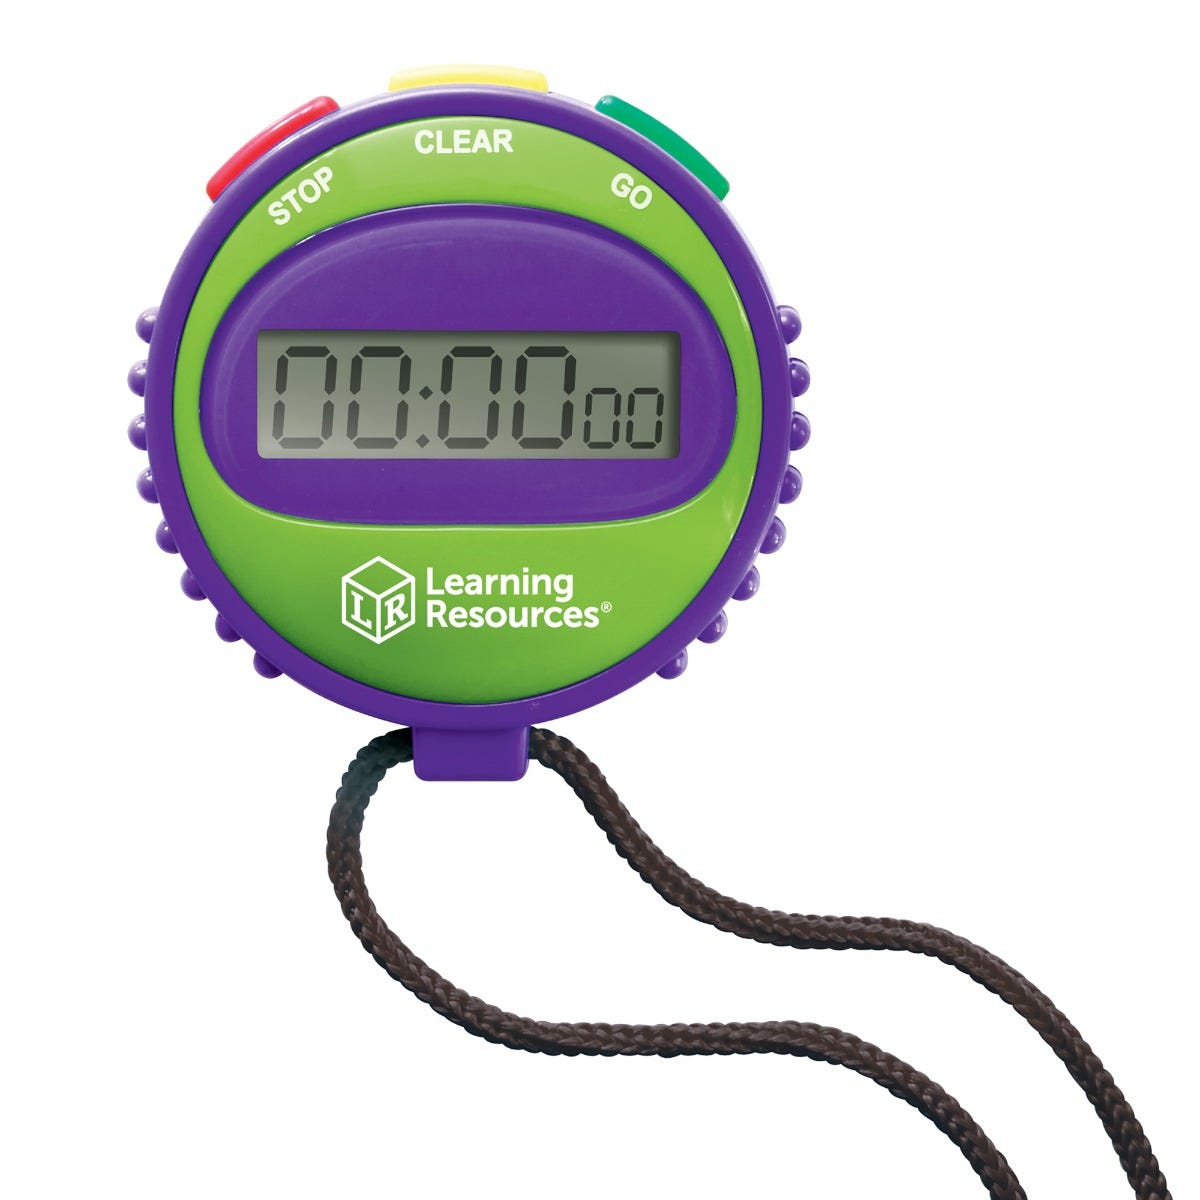 Simple Stopwatch, On your mark get set.go! Great for races, games and other timed activities, this simple stopwatch is easy to use, making it perfect for both children and adults. The Easy-to-use simple stopwatch has a chunky design which is ideal for small hands with three Simple button functions; green for go, red for stop and yellow for clear Learning Resources Simple Stopwatch The Large digital display on the Simple Stopwatch shows minutes, seconds and 1/1000 seconds The Simple Stopwatch requires one 1.